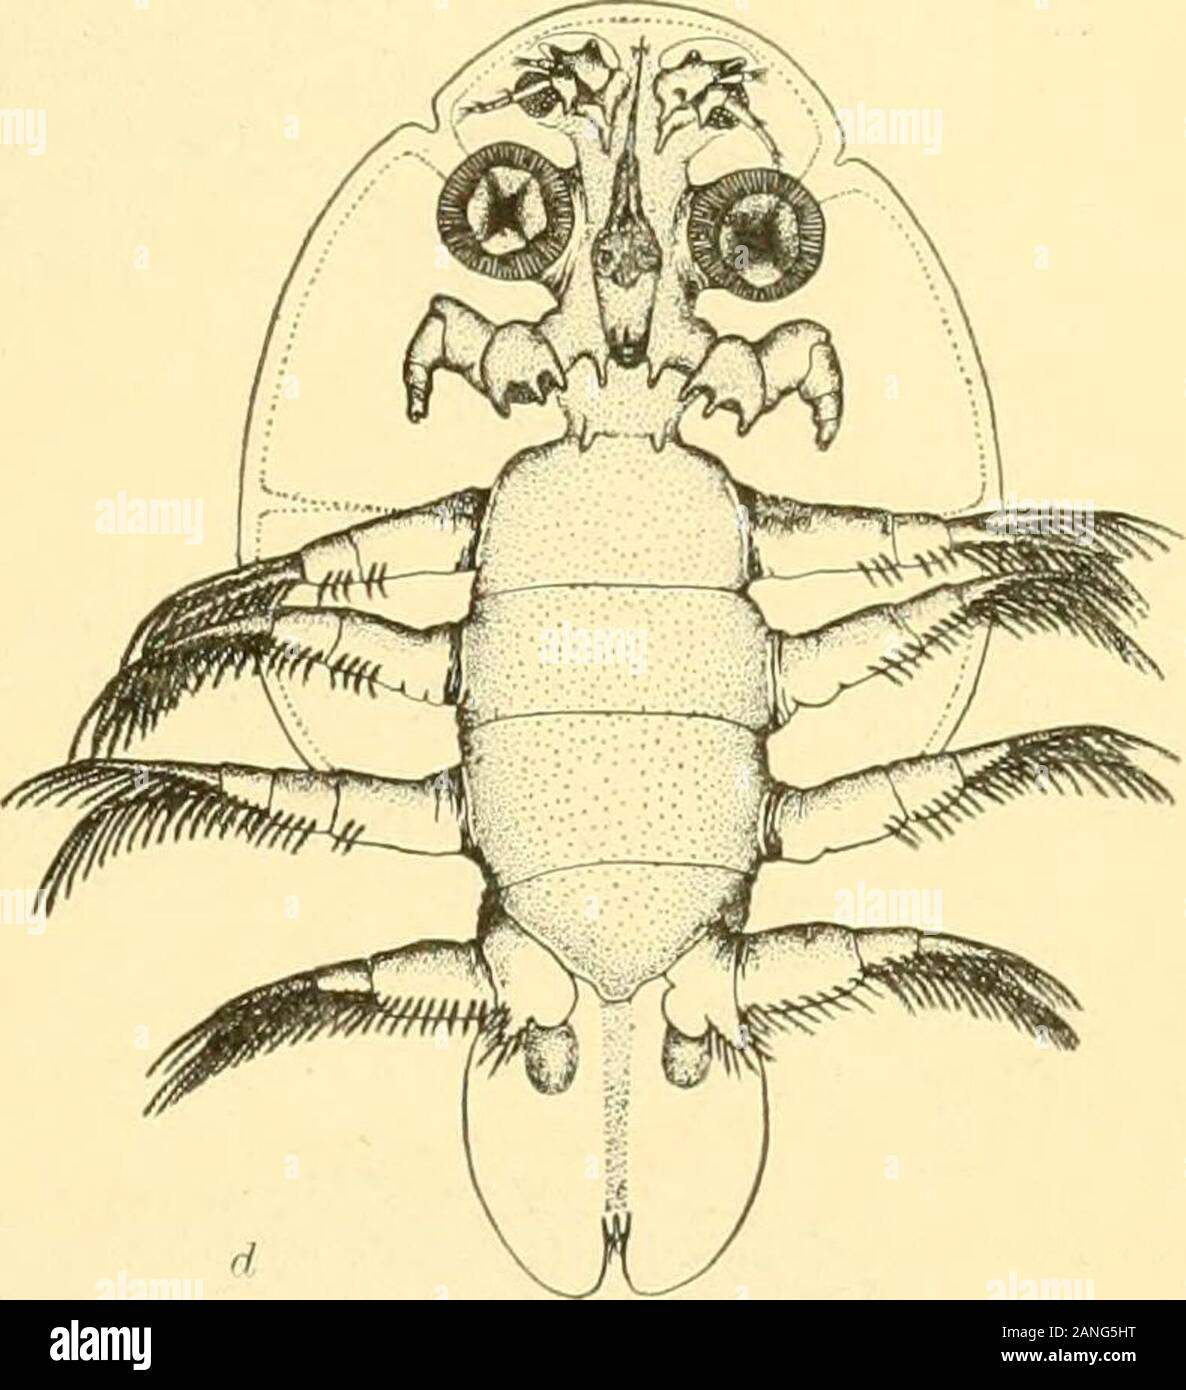 Bulletin of the Bureau of Fisheries . Argulus megalops Smith, a. Two posterior swimming legs of male; h, posterior maxilliped of male; c, antenna of female r/, ventral surface of female. one-fifth the entire length); papilla basal. Antenna medium, closely approximated and well-armed;sucking discs small. Posterior niaxilhpeds large, well-armed; basal plate broad triangular, teethrather widely separated, stout and blunt. Swimming legs long, projecting far beyond the edge of thecarapace, without flagella; lobes on posterior legs narrow- and sharply pointed posteriorly. Male witha large thumb-shap Stock Photo